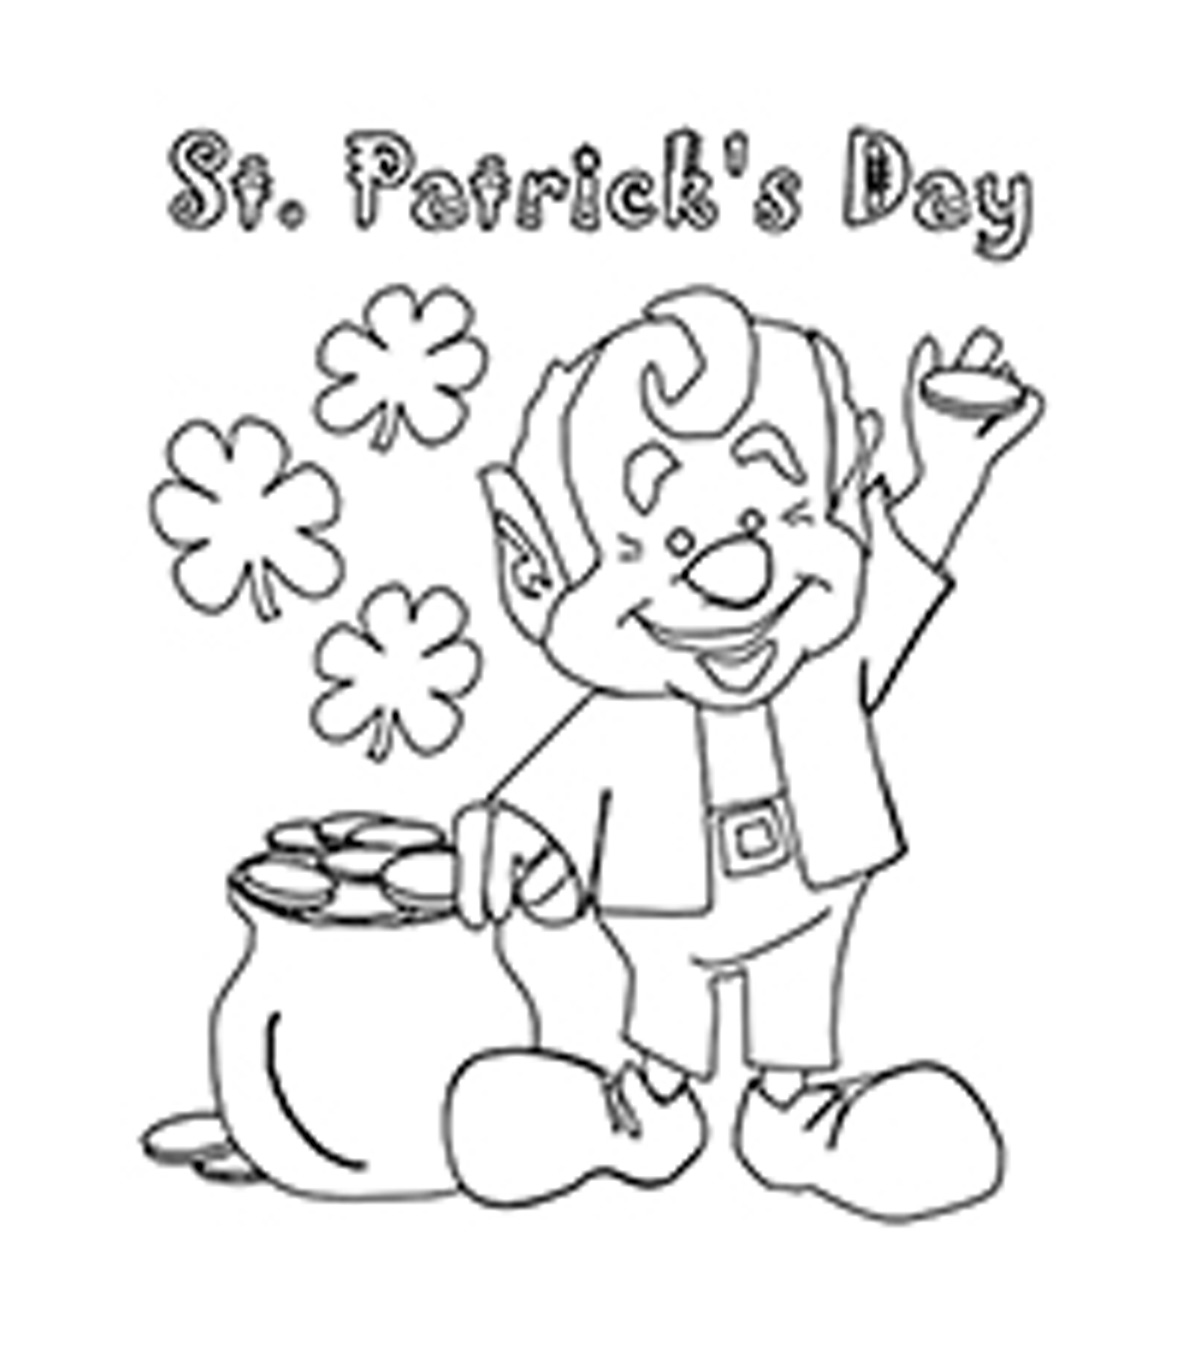 25 Best St. Patrick’s Day Coloring Pages For Your Little Ones_image